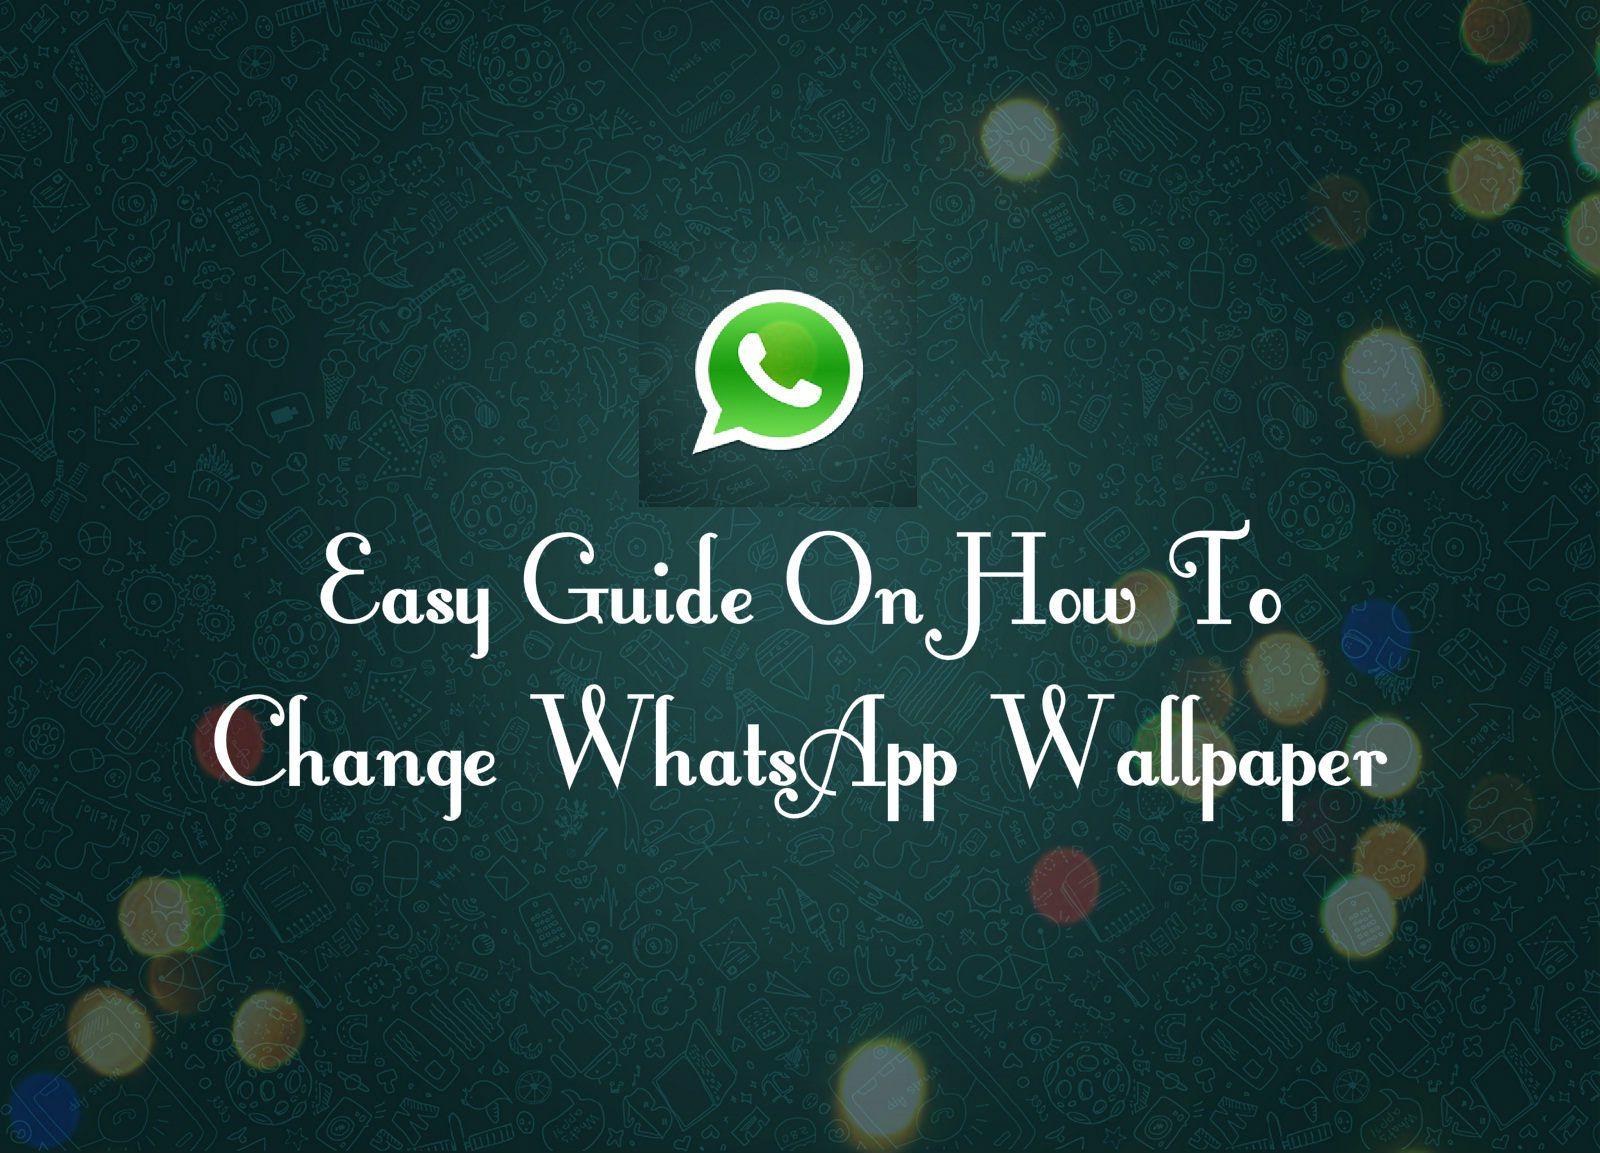 How To Change Wallpaper On WhatsApp For Android ? 3 Easy Steps!